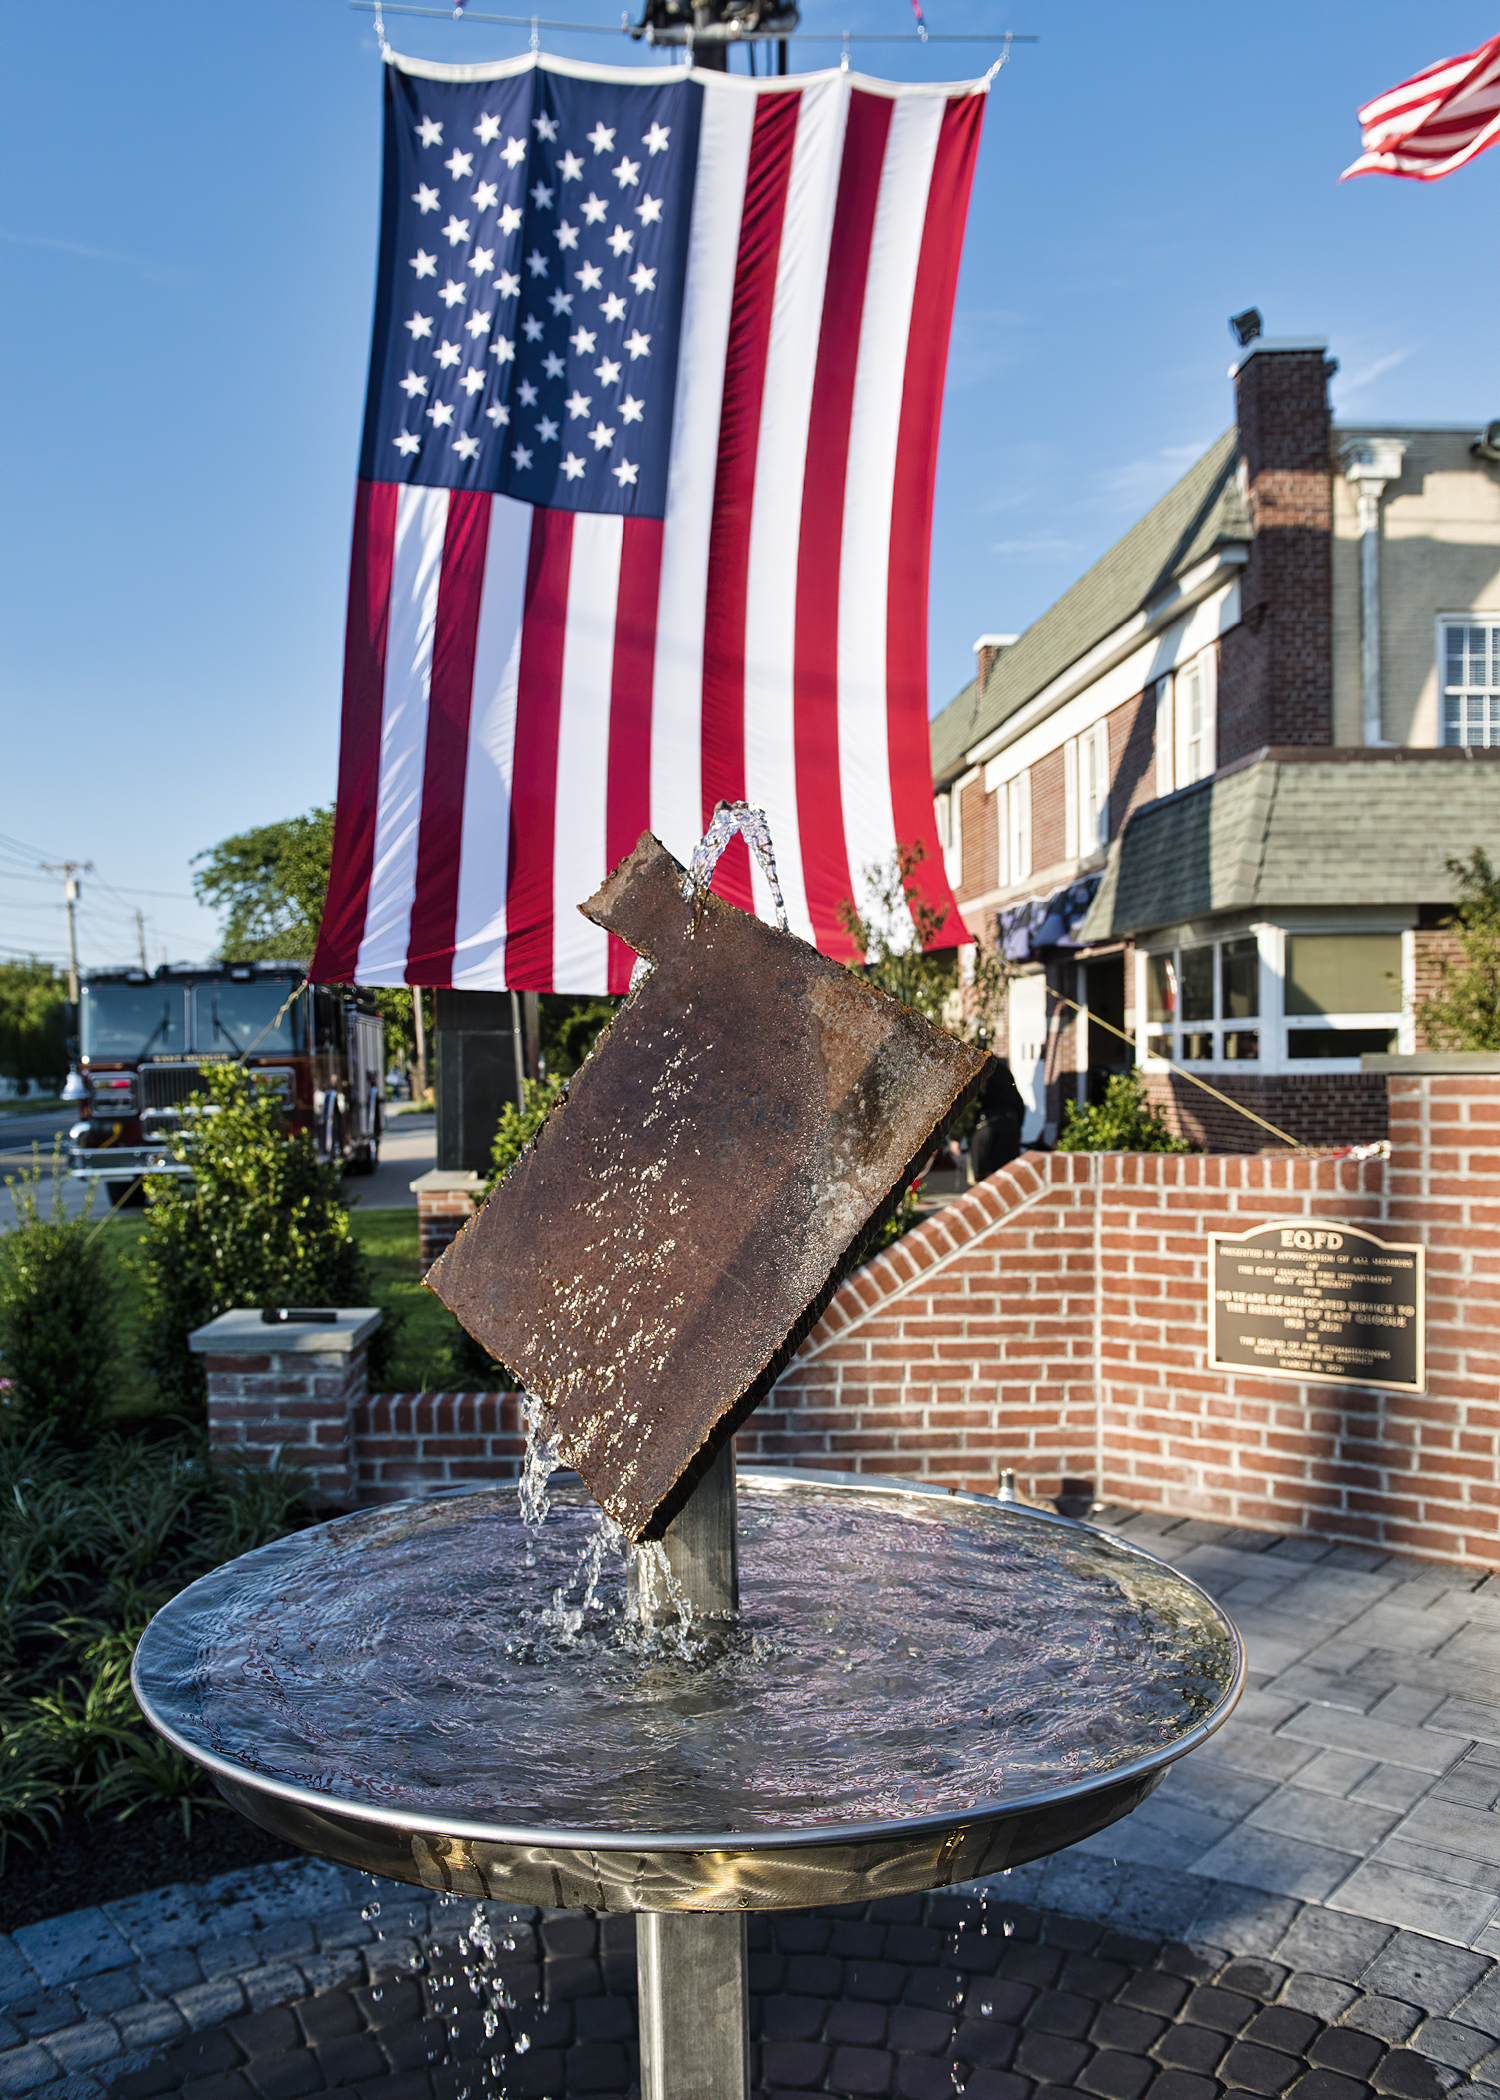 The East Quogue Fire Department hosted a 9/11 memorial ceremony on Saturday.  COURTESY WESTHMAPTON BEACH FIRE DEPARTMENT